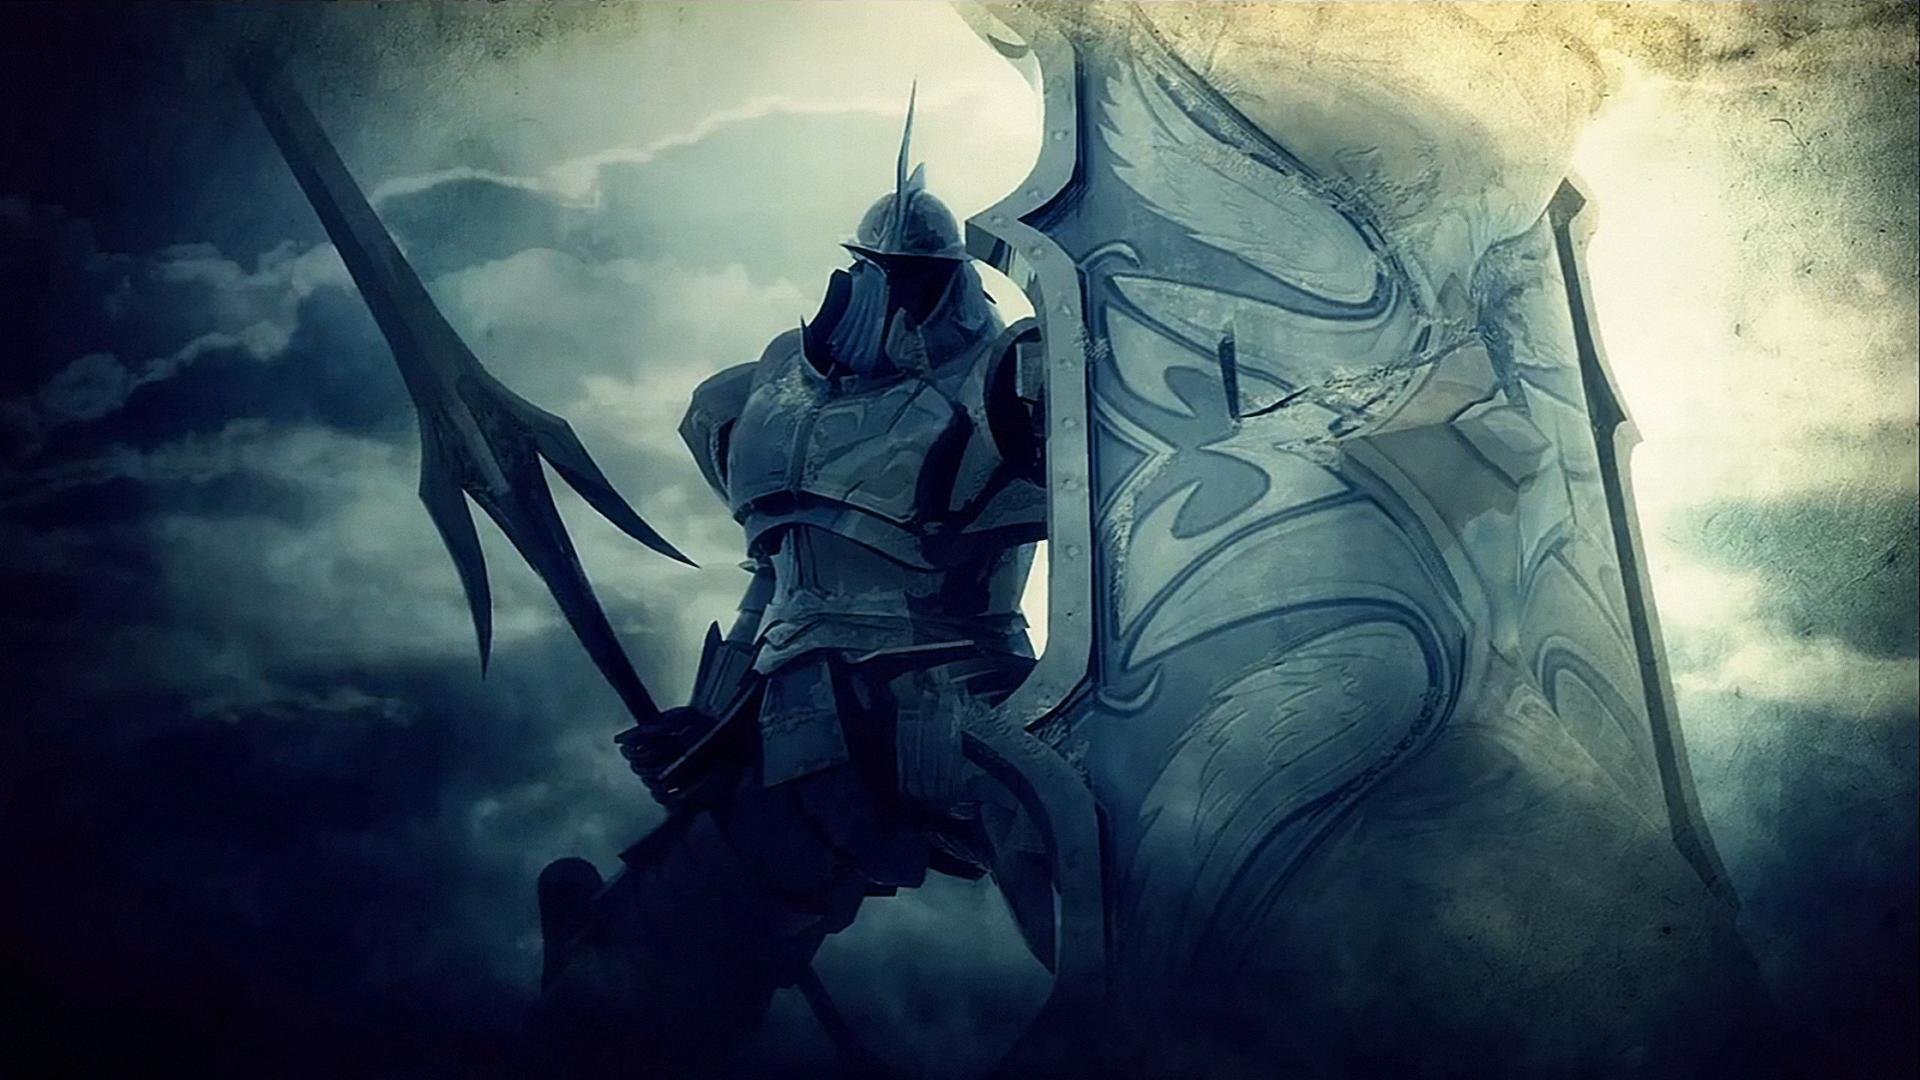 Download full hd 1920x1080 Demon's Souls PC background ID:150644 for free